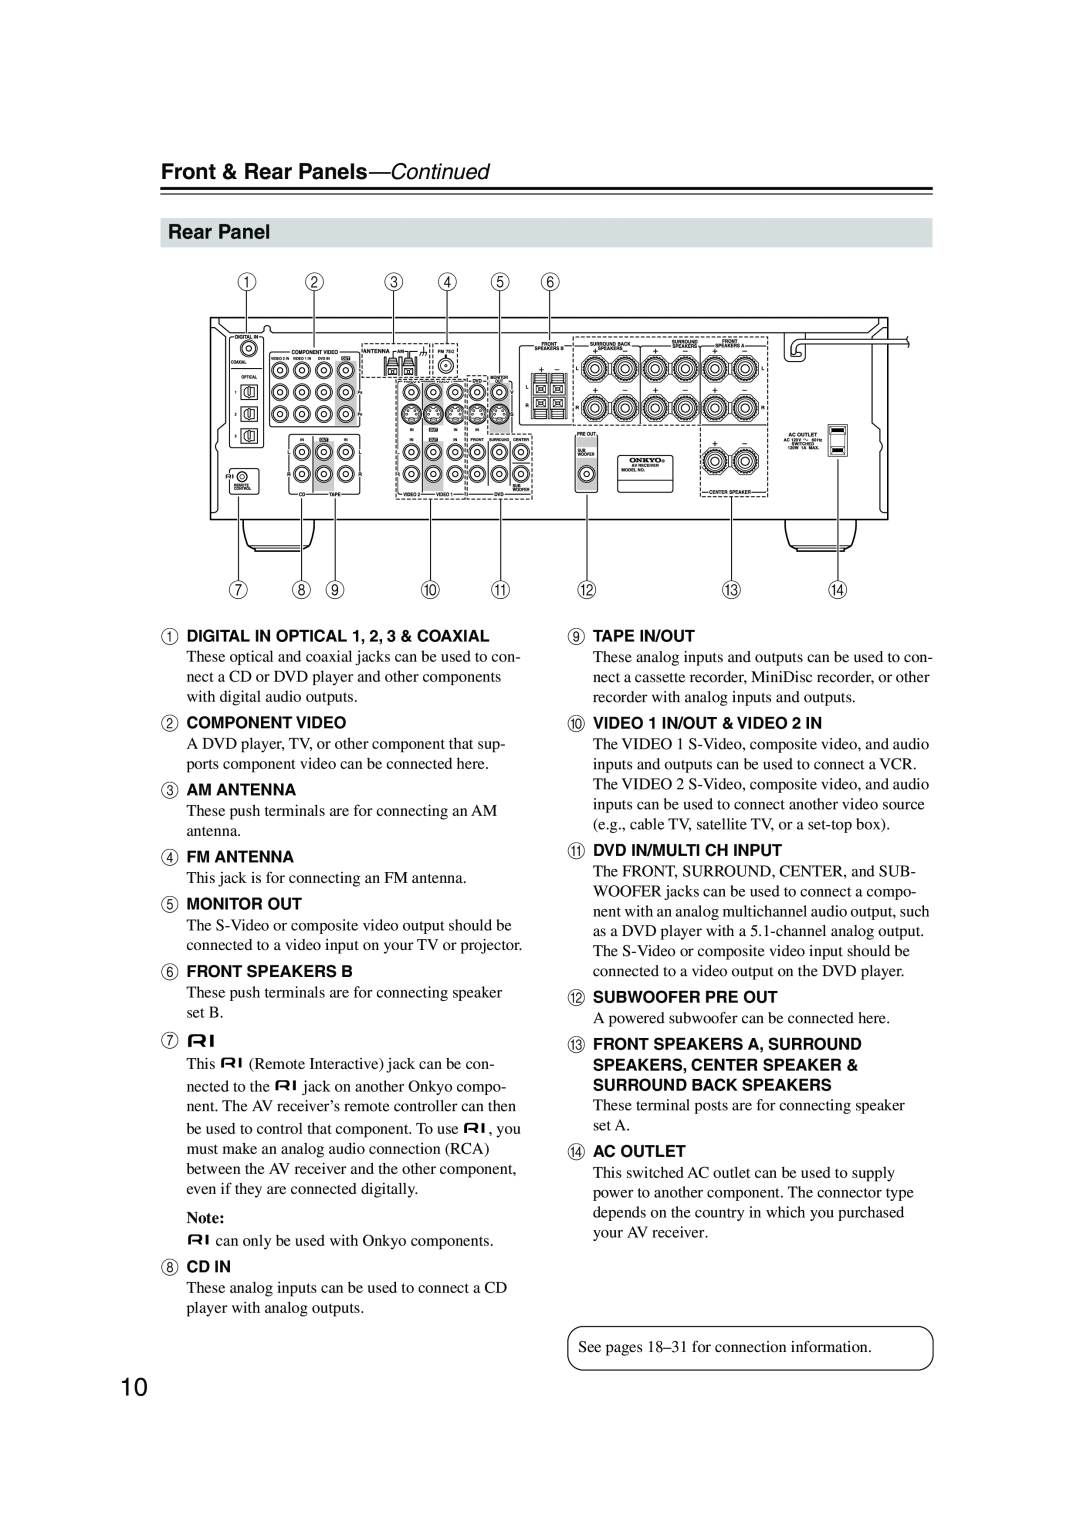 Onkyo HT-S780 instruction manual Front & Rear Panels—Continued 